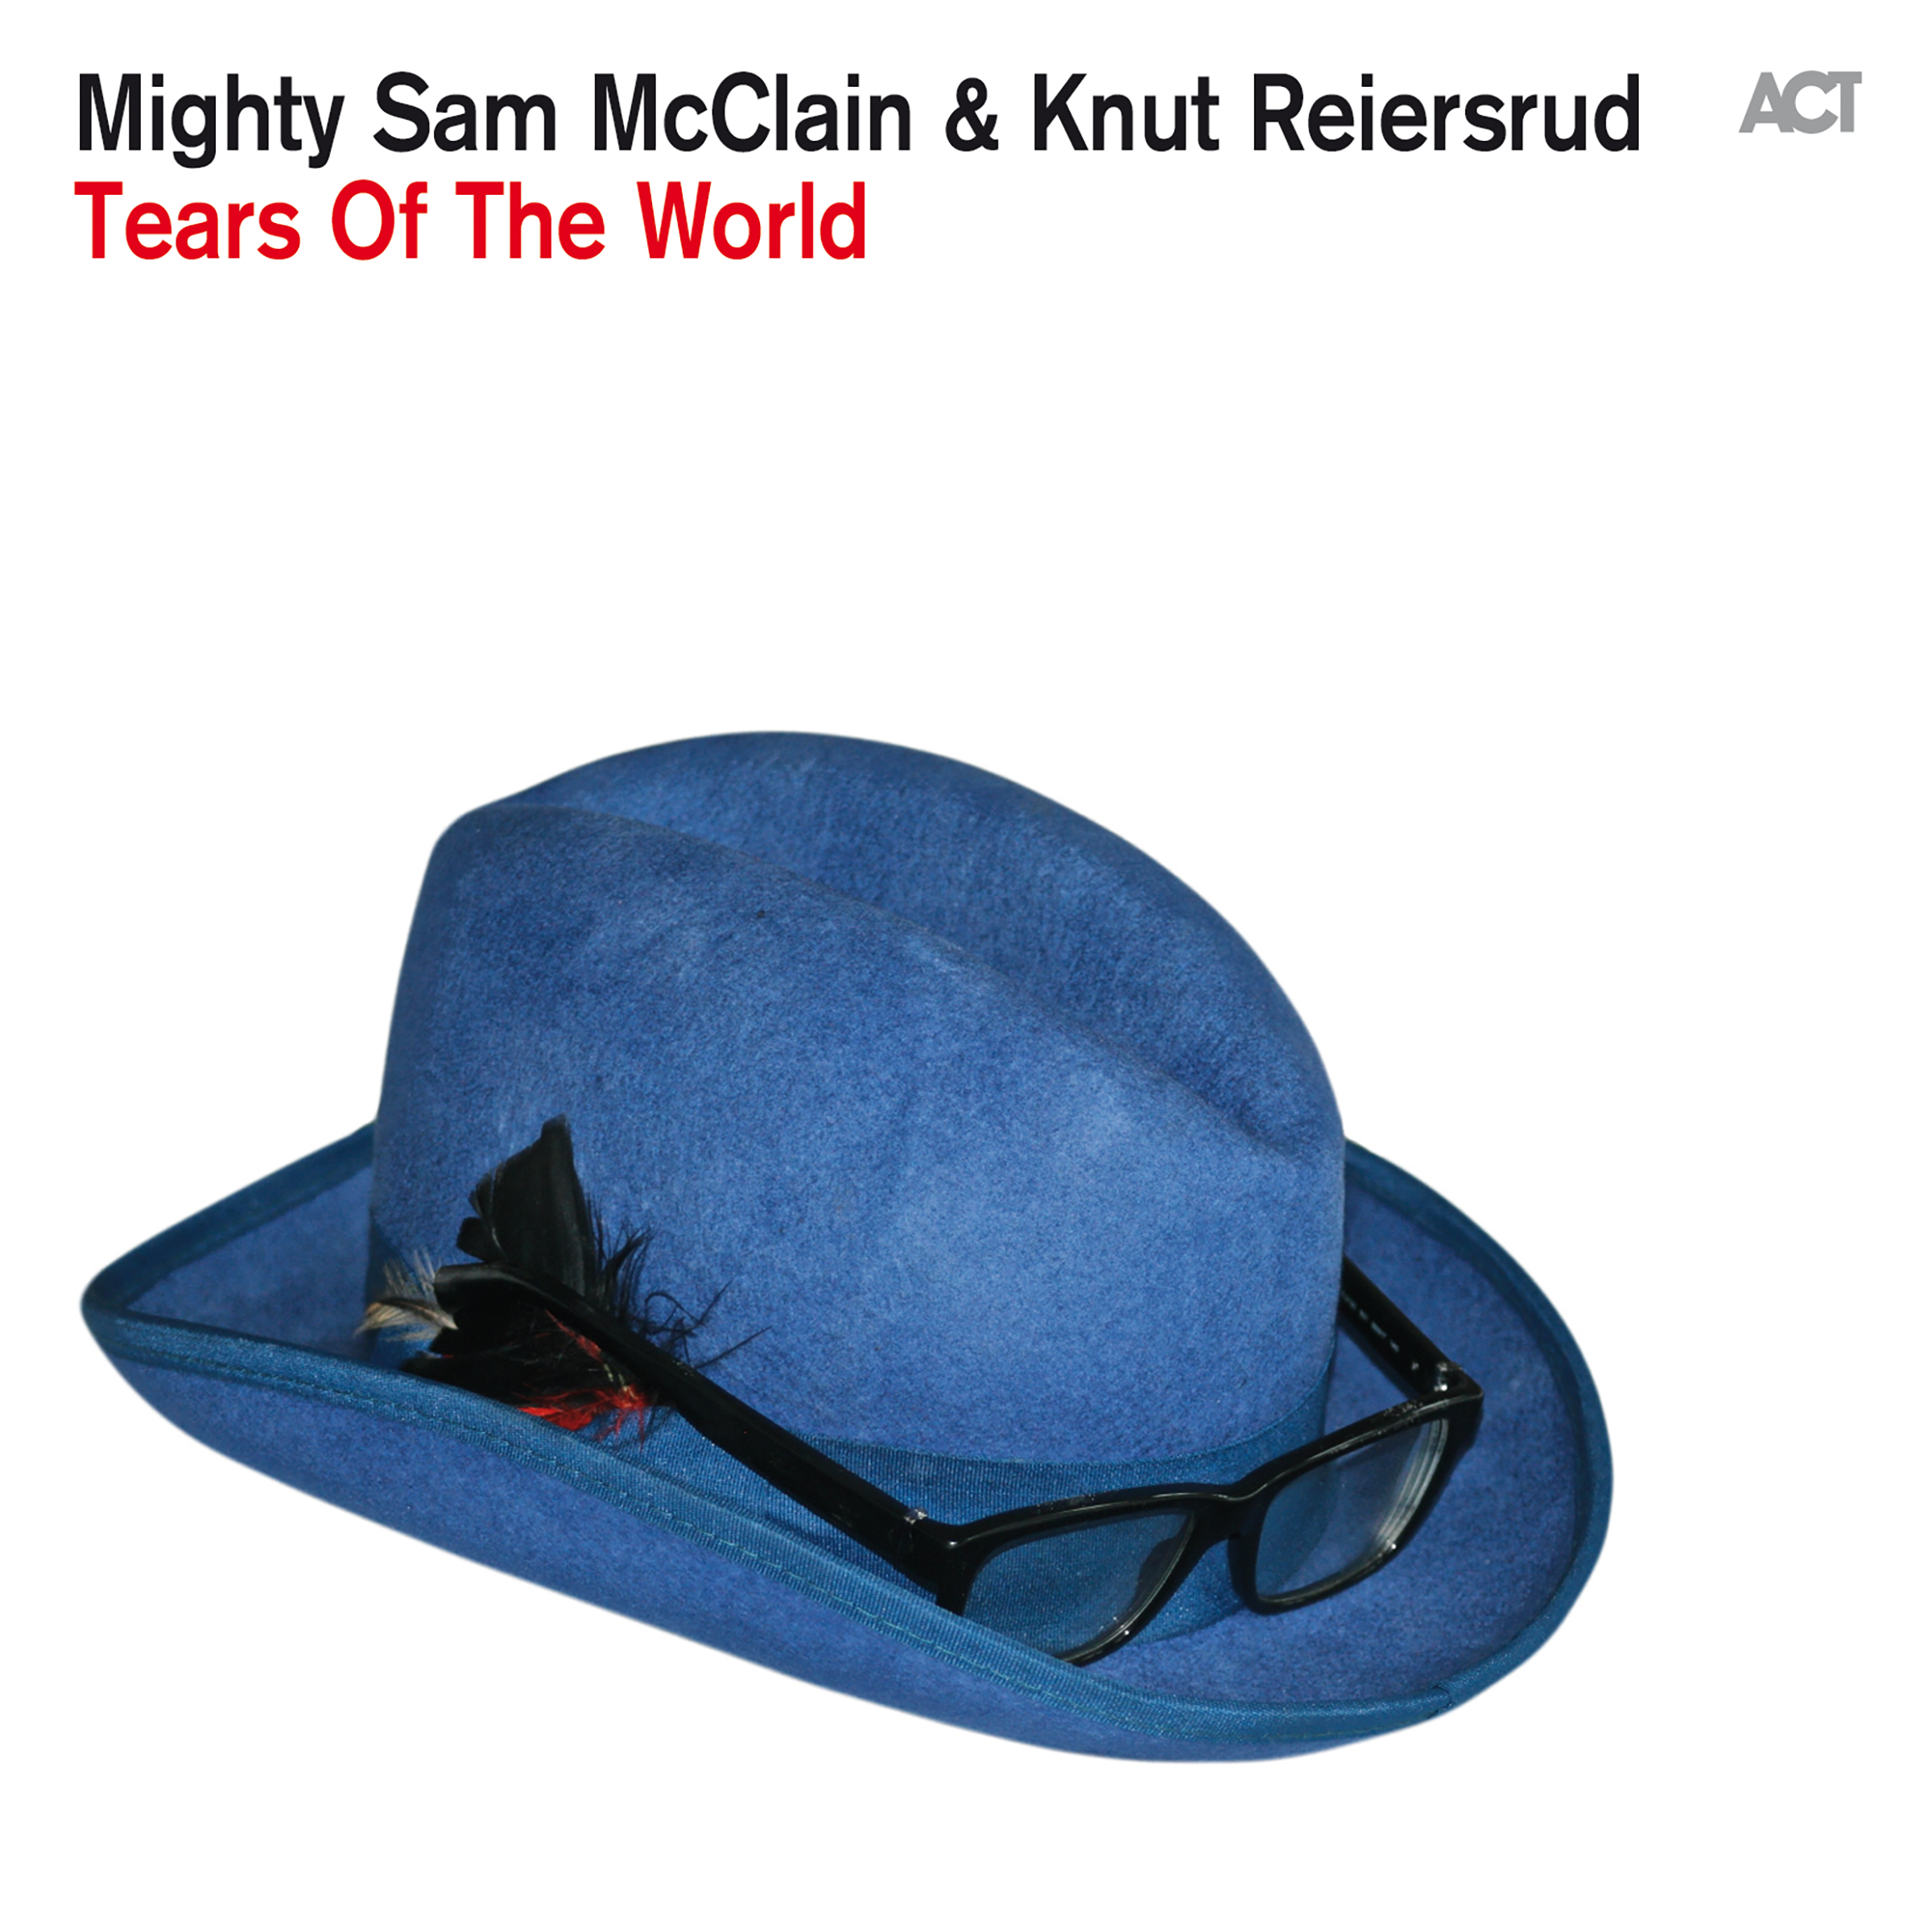 Tears Of The World (with Mighty Sam McClain)